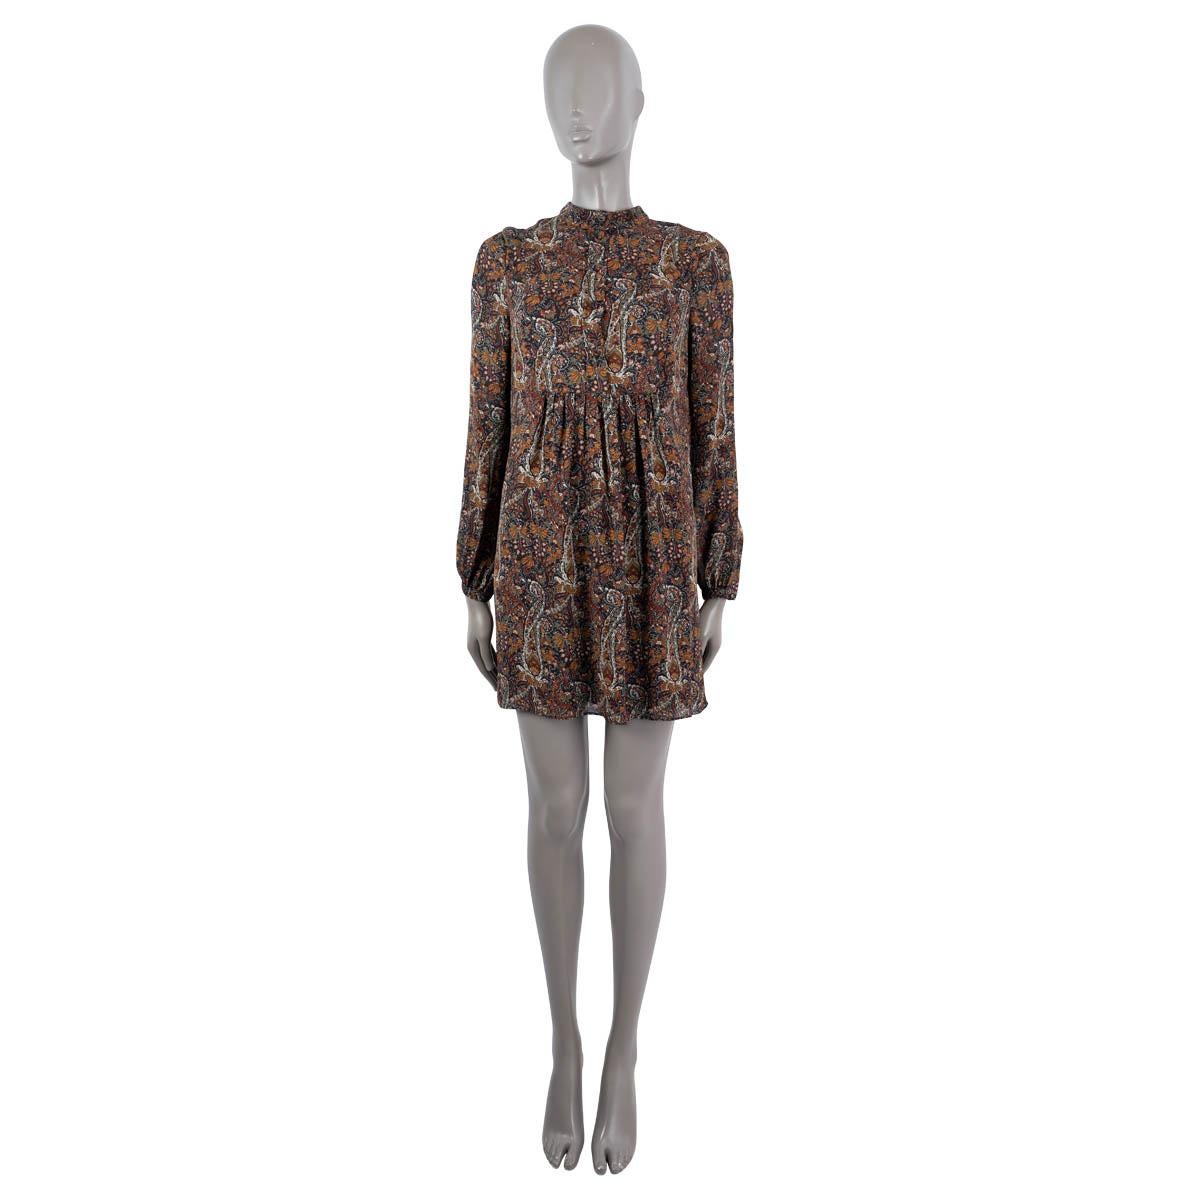 100% authentic Saint Laurent 2016 long sleeve paisley mini dress in brown, olive, mustard, beige and midnight blue viscose (100%). The design features five buttons at front, a stand-up collar, gathered front and sleeves with one-button cuff. Lined